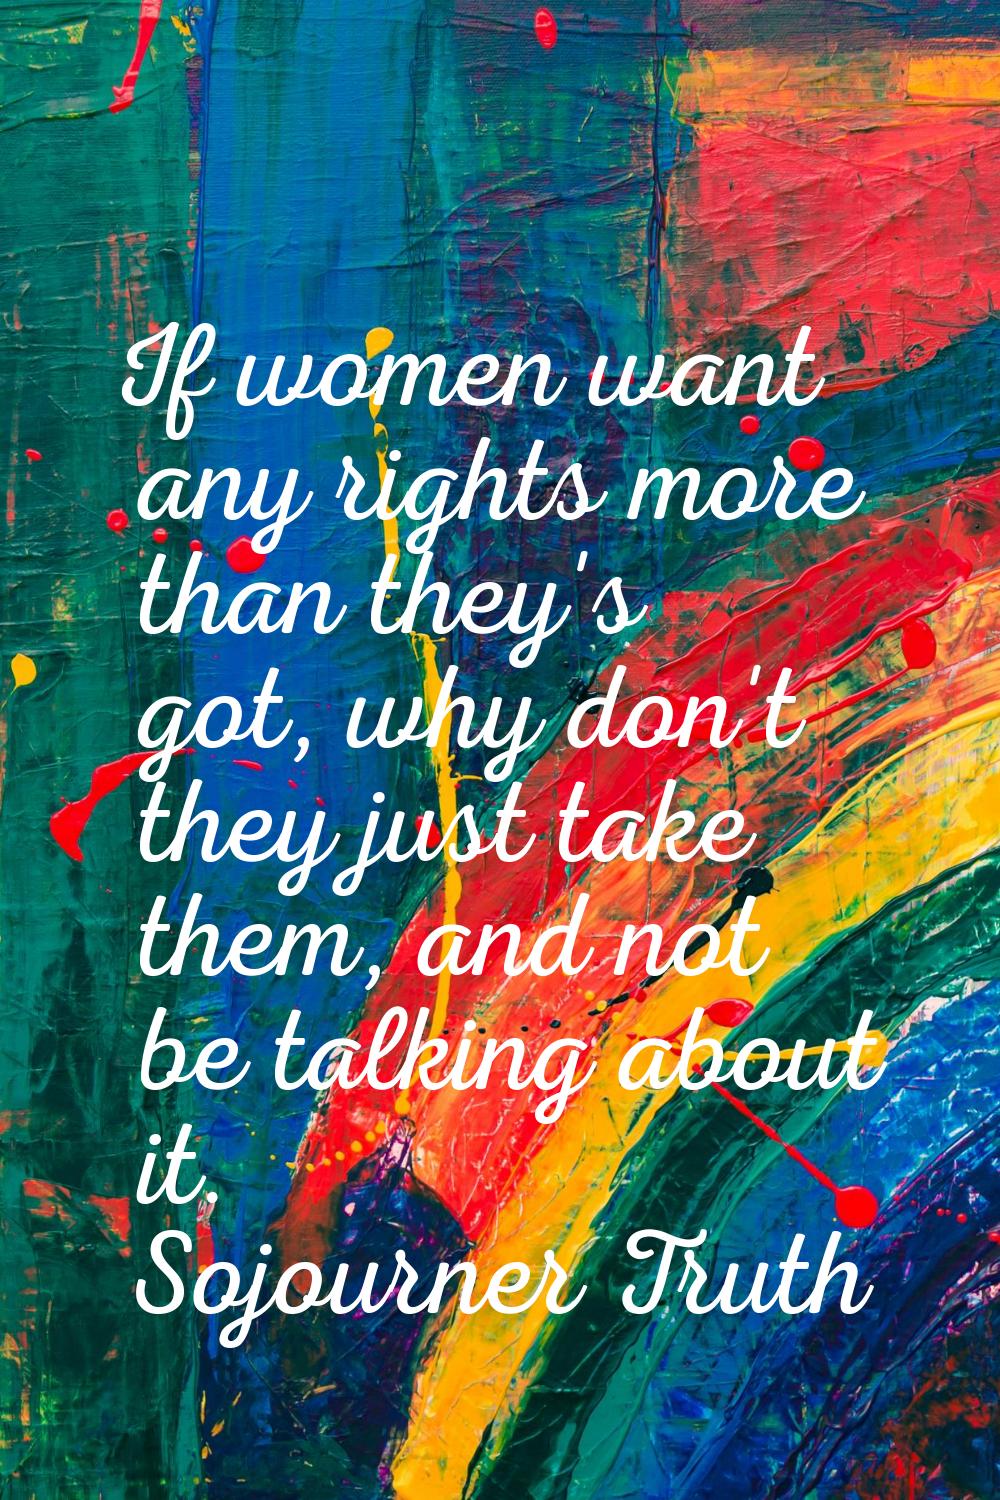 If women want any rights more than they's got, why don't they just take them, and not be talking ab